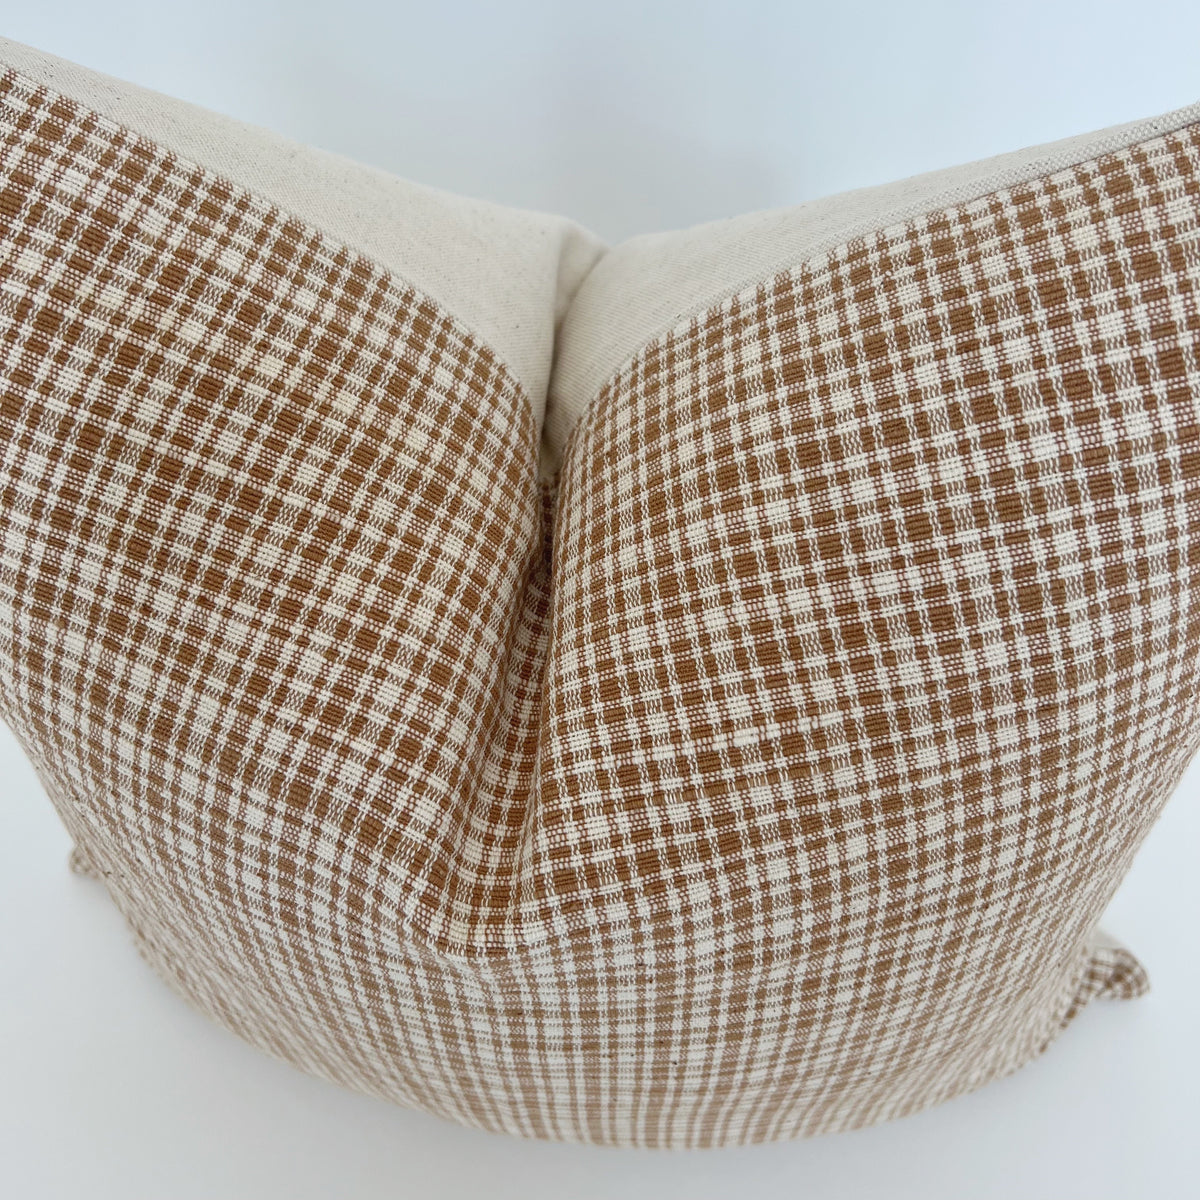 Gingham Rust and Cream Throw Pillow Cover overhead view